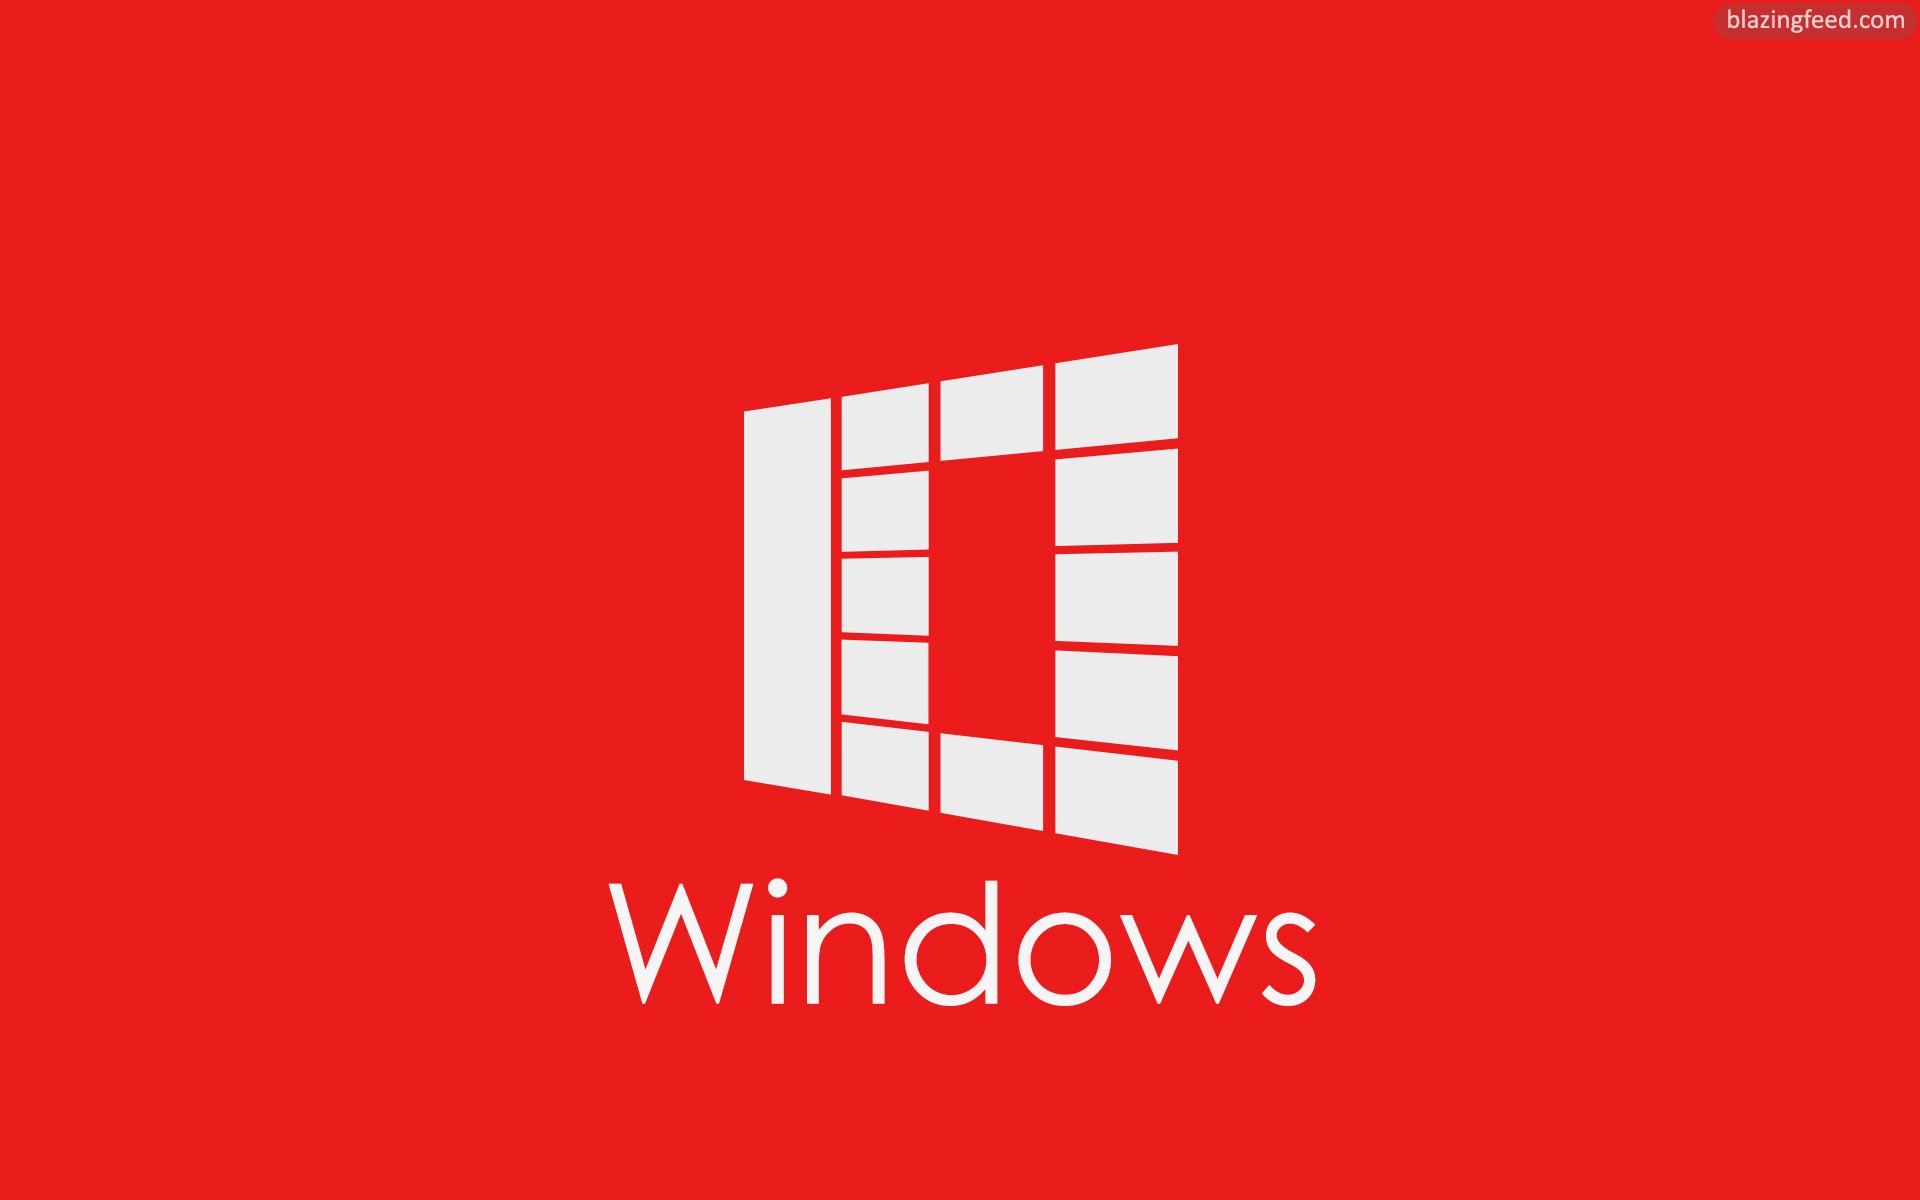 Windows 10 Logo Wallpaper and Theme Pack All for Windows 10 1920x1200